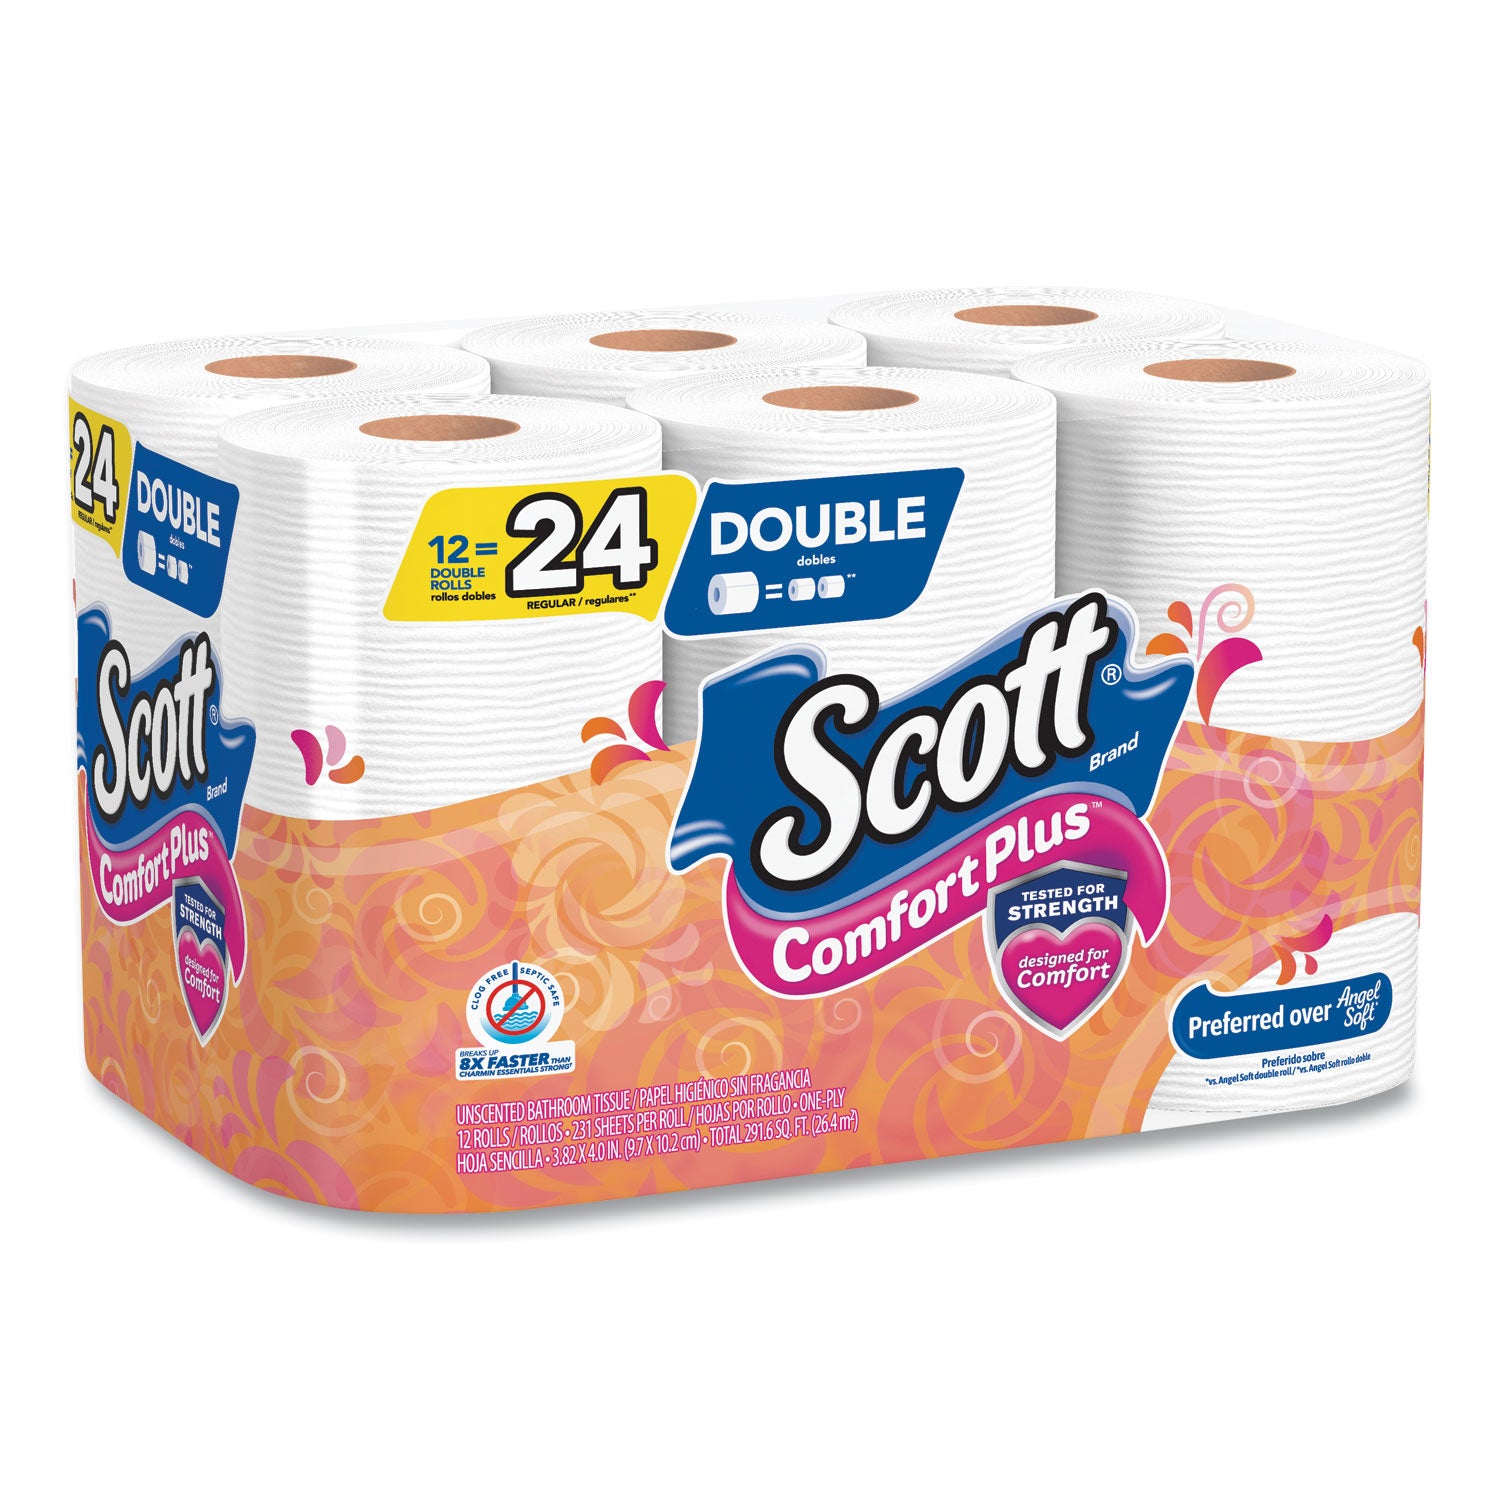 comfortplus-toilet-paper-double-roll-bath-tissue-septic-safe-1-ply-white-231-sheets-roll-12-rolls-pack-4-packs-carton_kcc47618 - 2